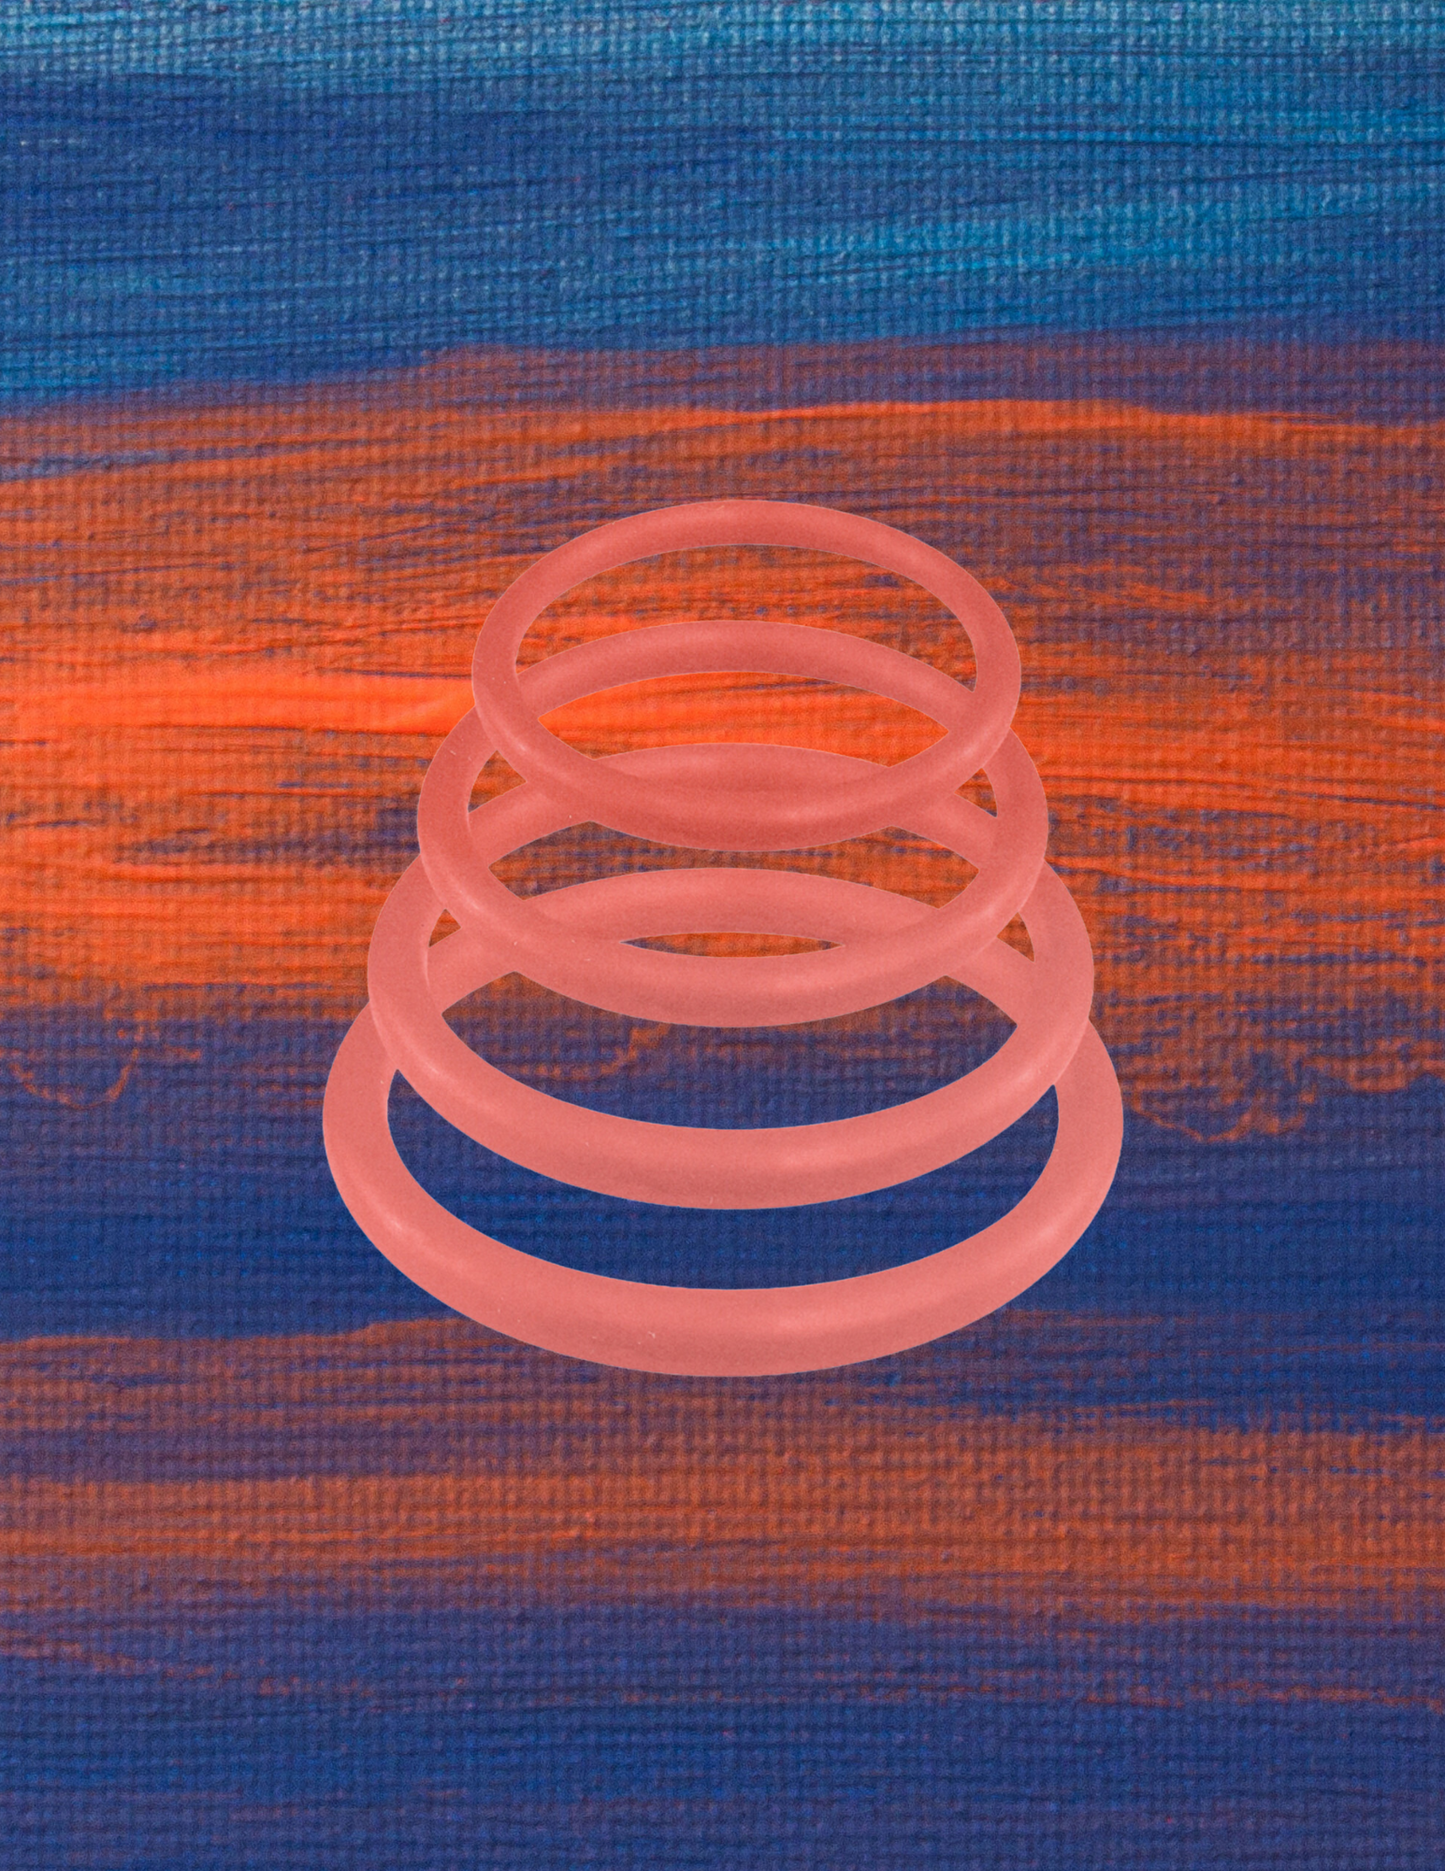 Ad for the Merge Collection Rubber O-Ring (coral) from Sportsheets.